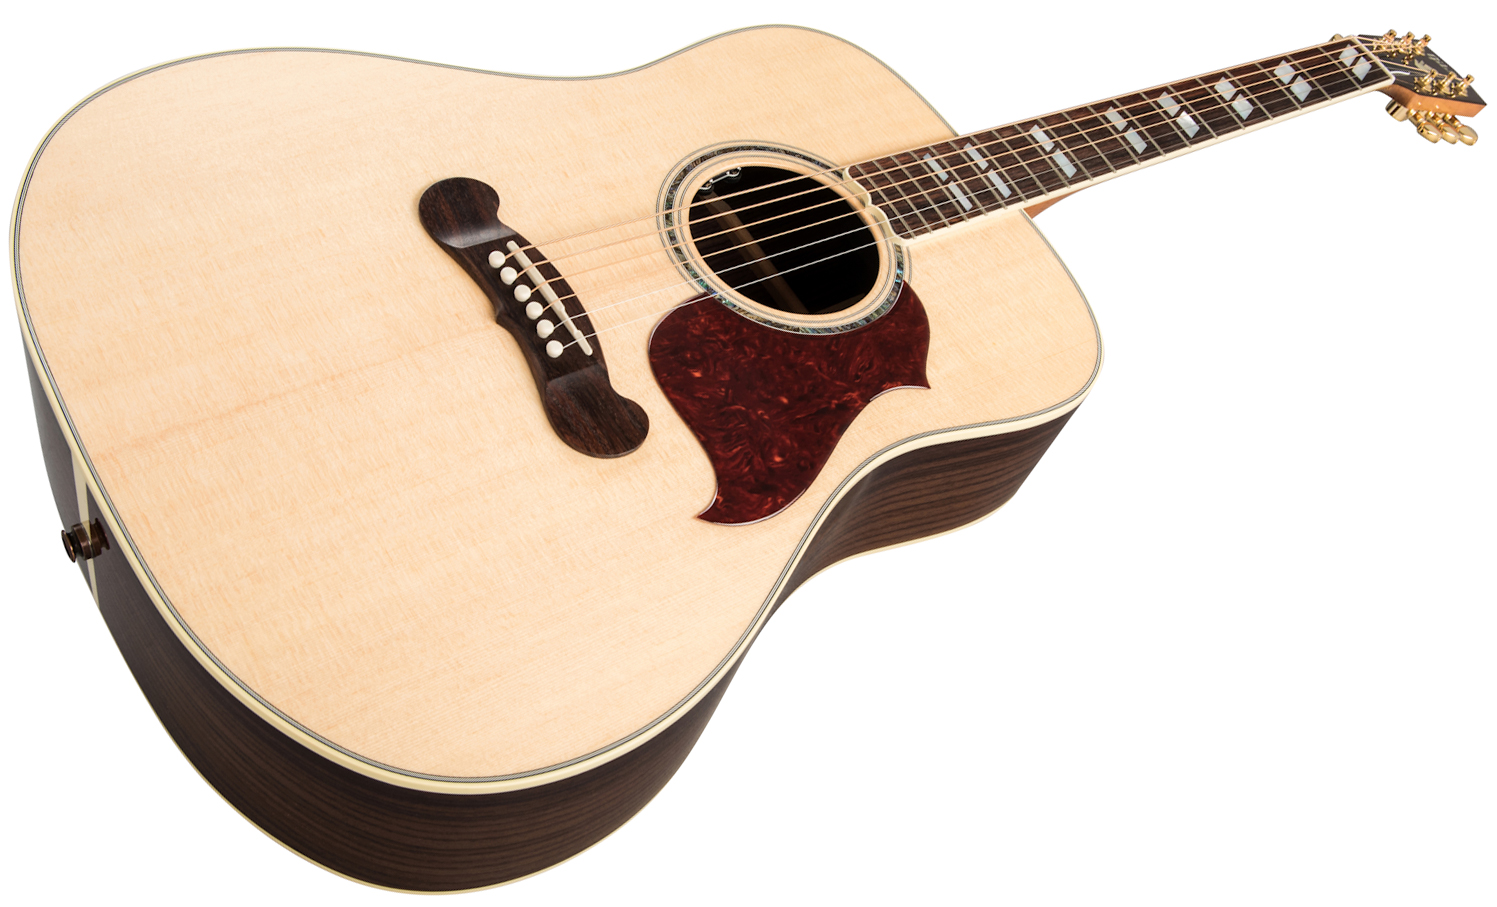 Gibson Songwriter Standard Rosewood 2019 Epicea Palissandre Rw - Antique Natural - Guitare Electro Acoustique - Variation 3